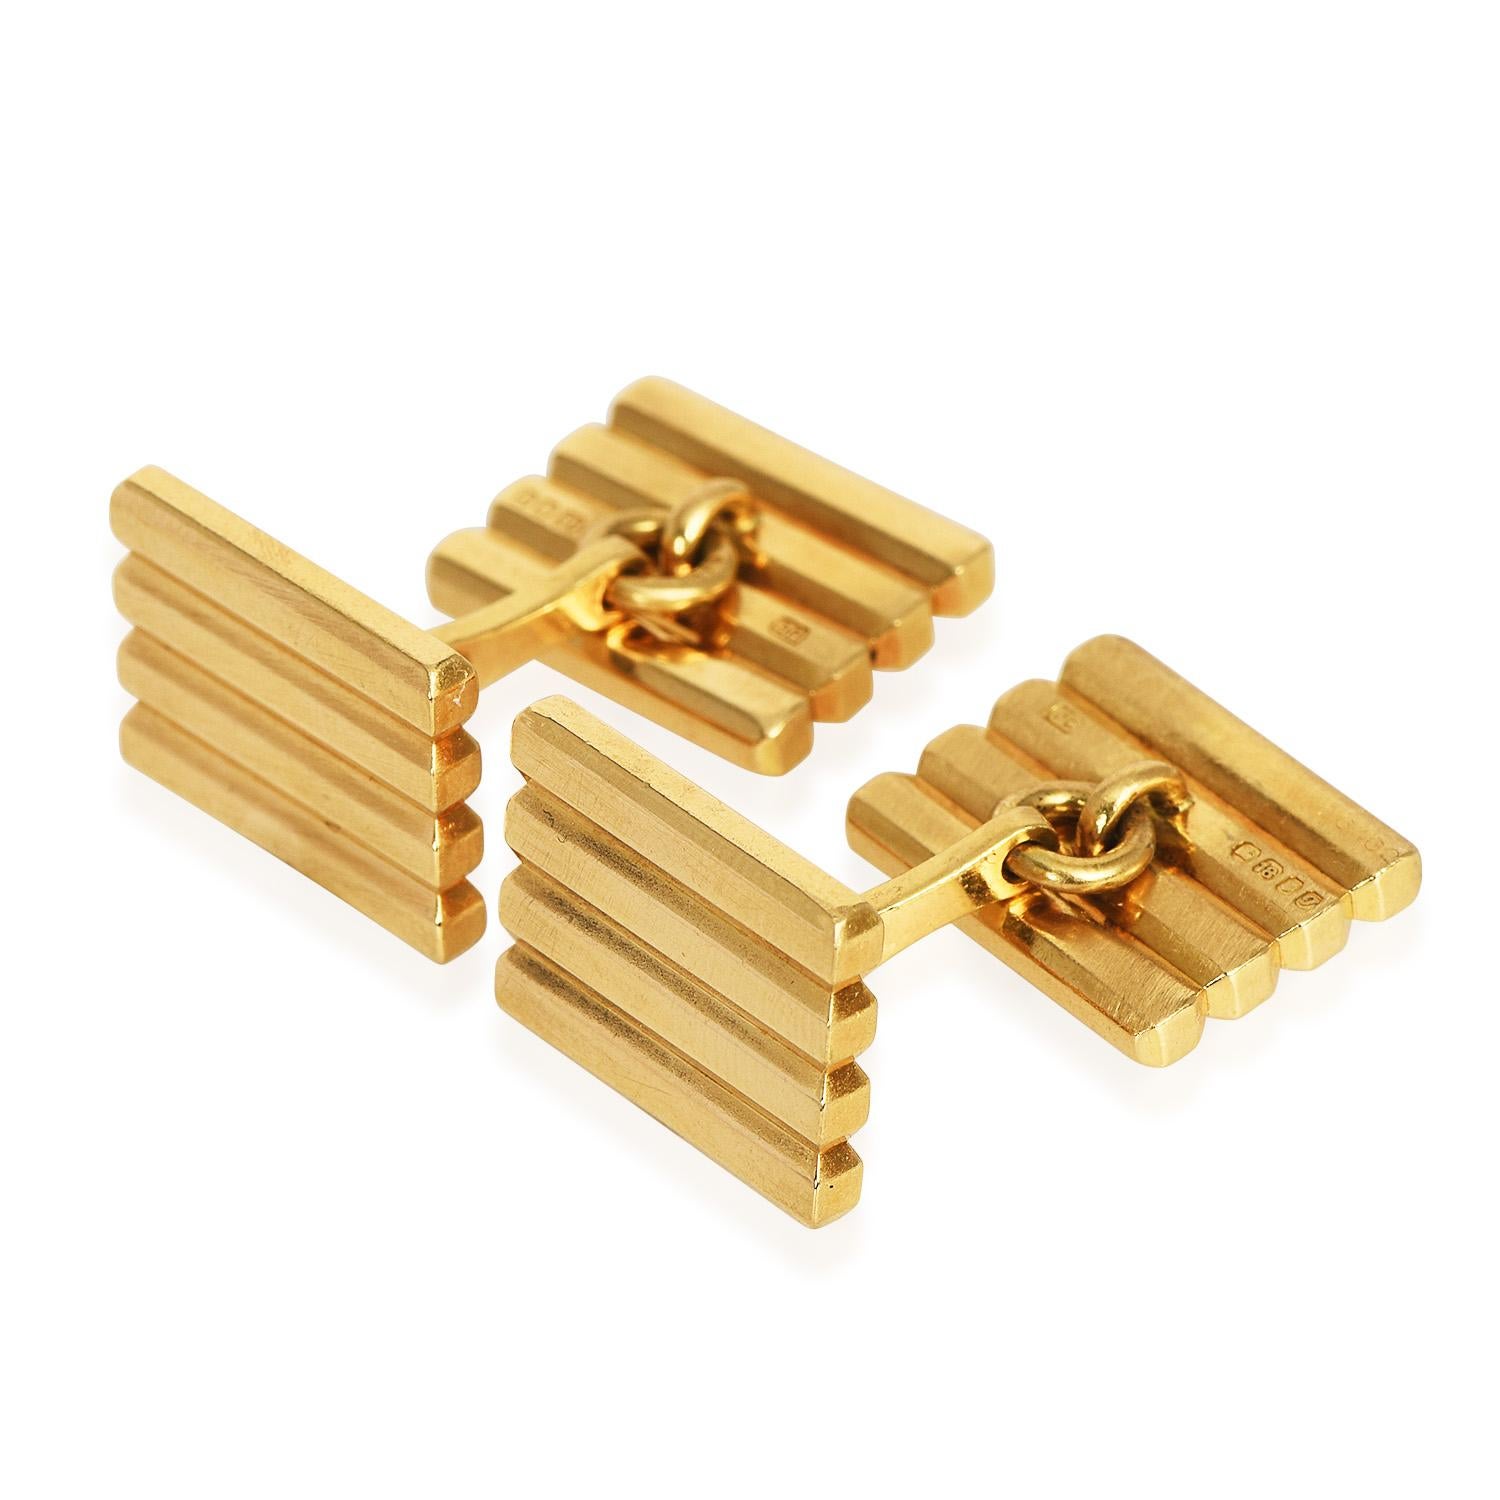 Rise above the rest at your next cocktail occasion with these vintage late 1970s  Cartier 18K Gold Tuxedo Cufflinks. High-polished finish, on a rectangular four-bar style. 
Weight: 25.8 Grams
Cufflinks measure:15 mm x 12 mm
Remains in Excellent